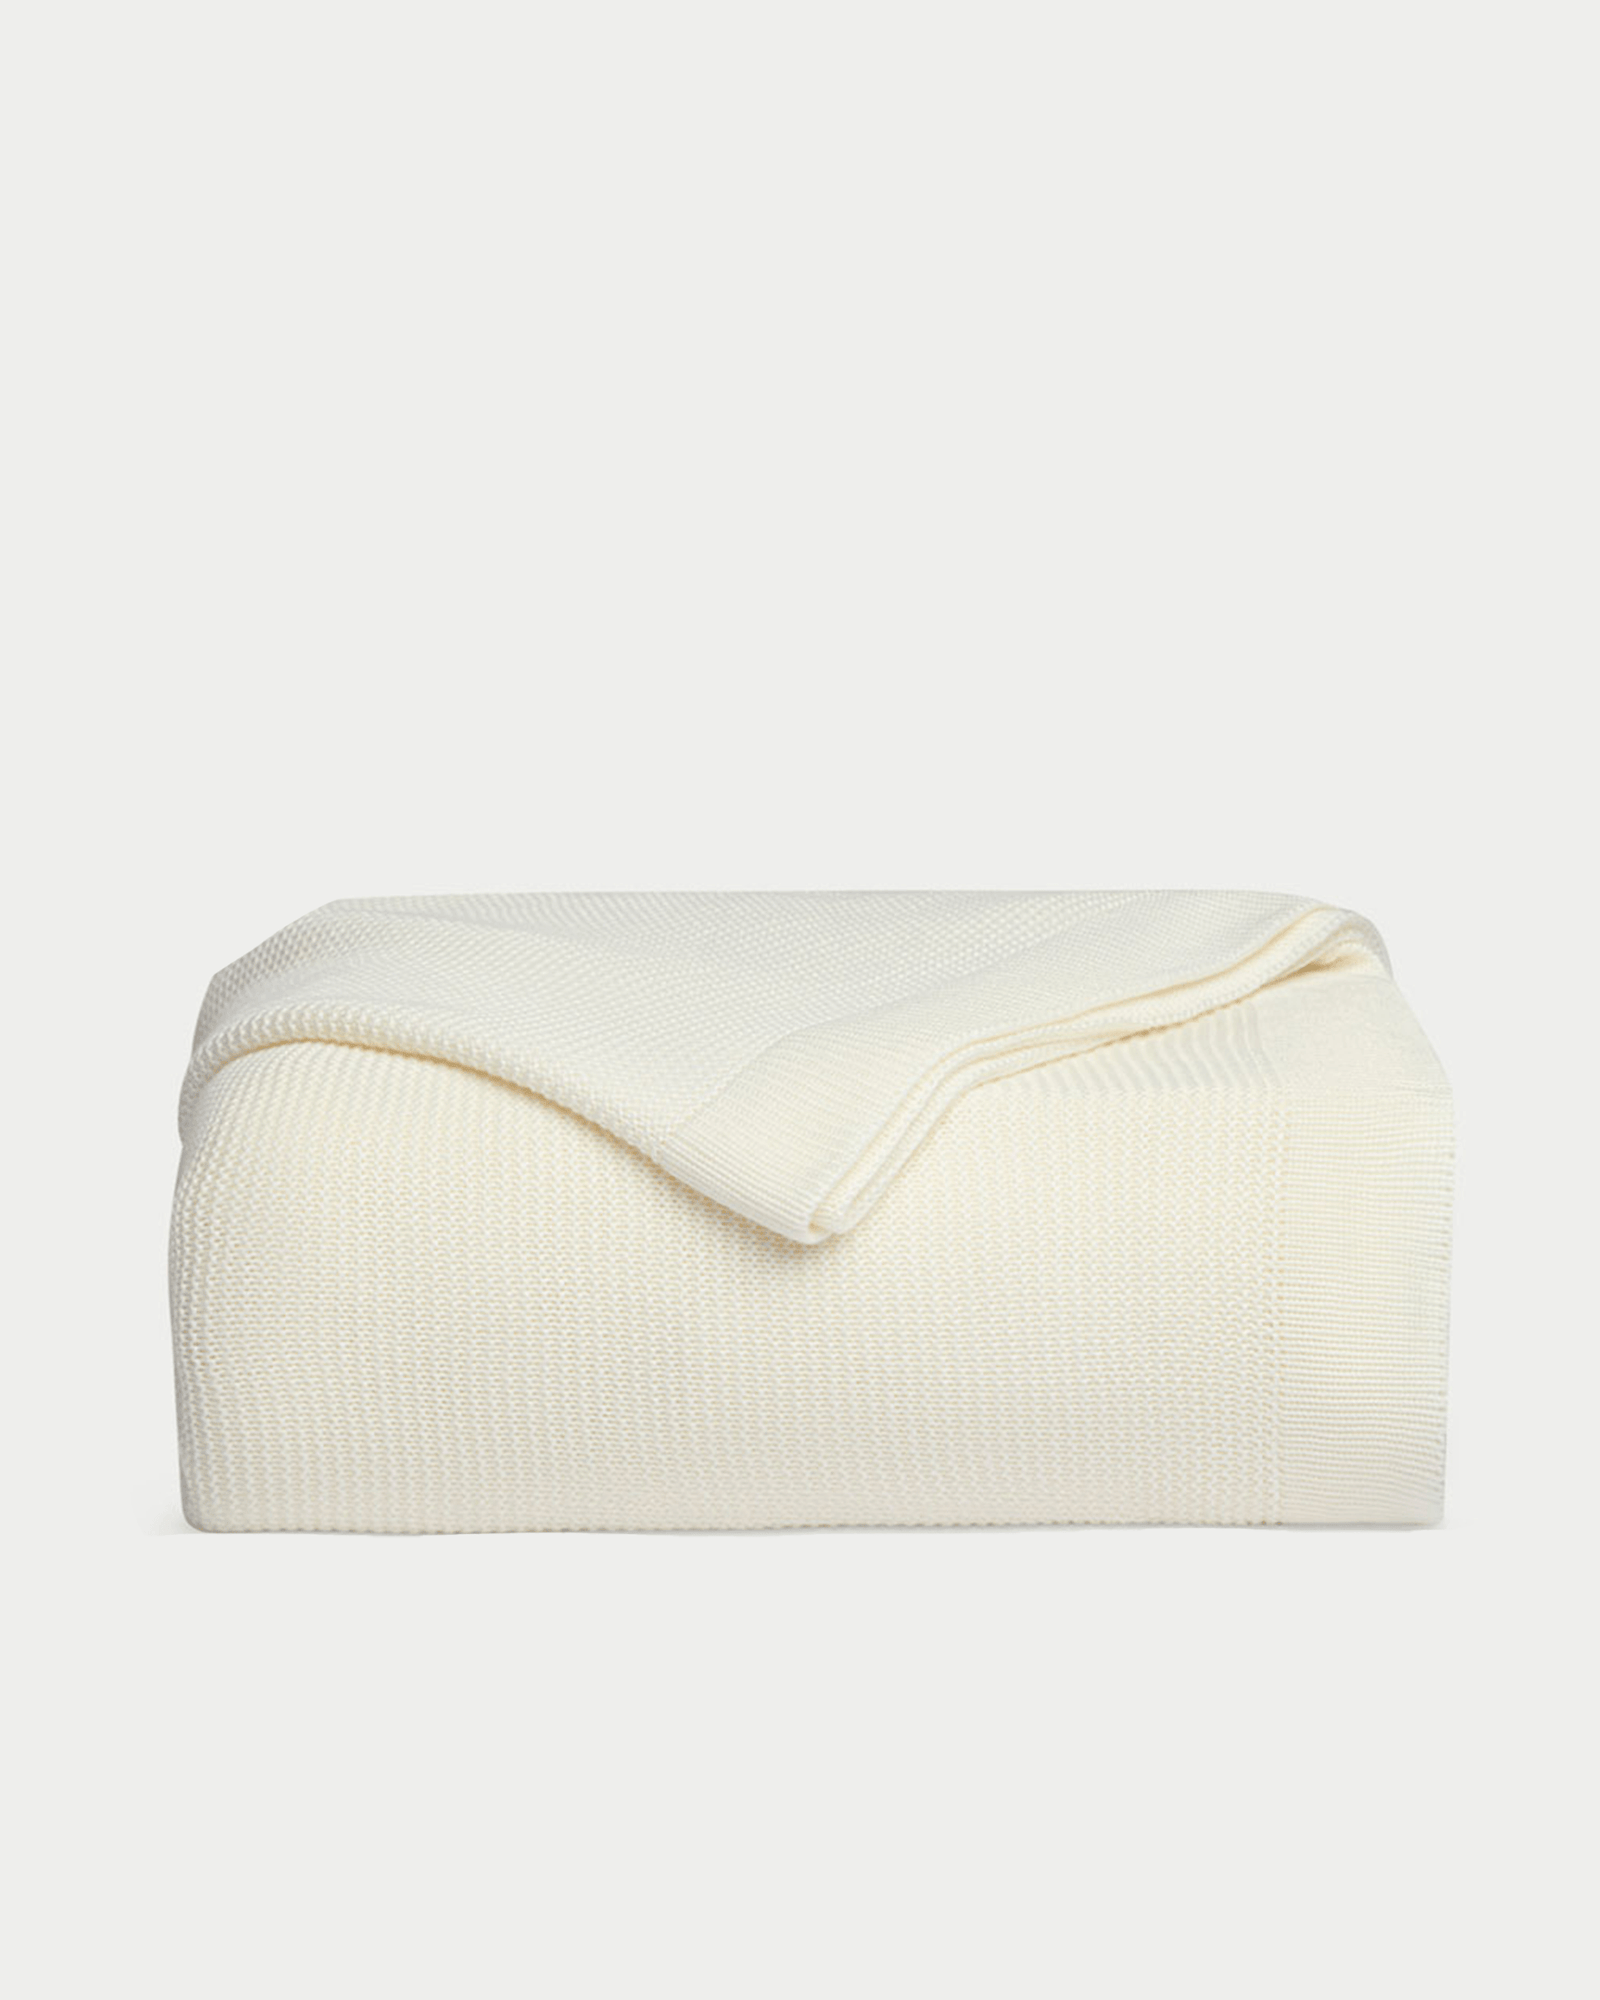 Ivory cloud knit blanket folded with white background 